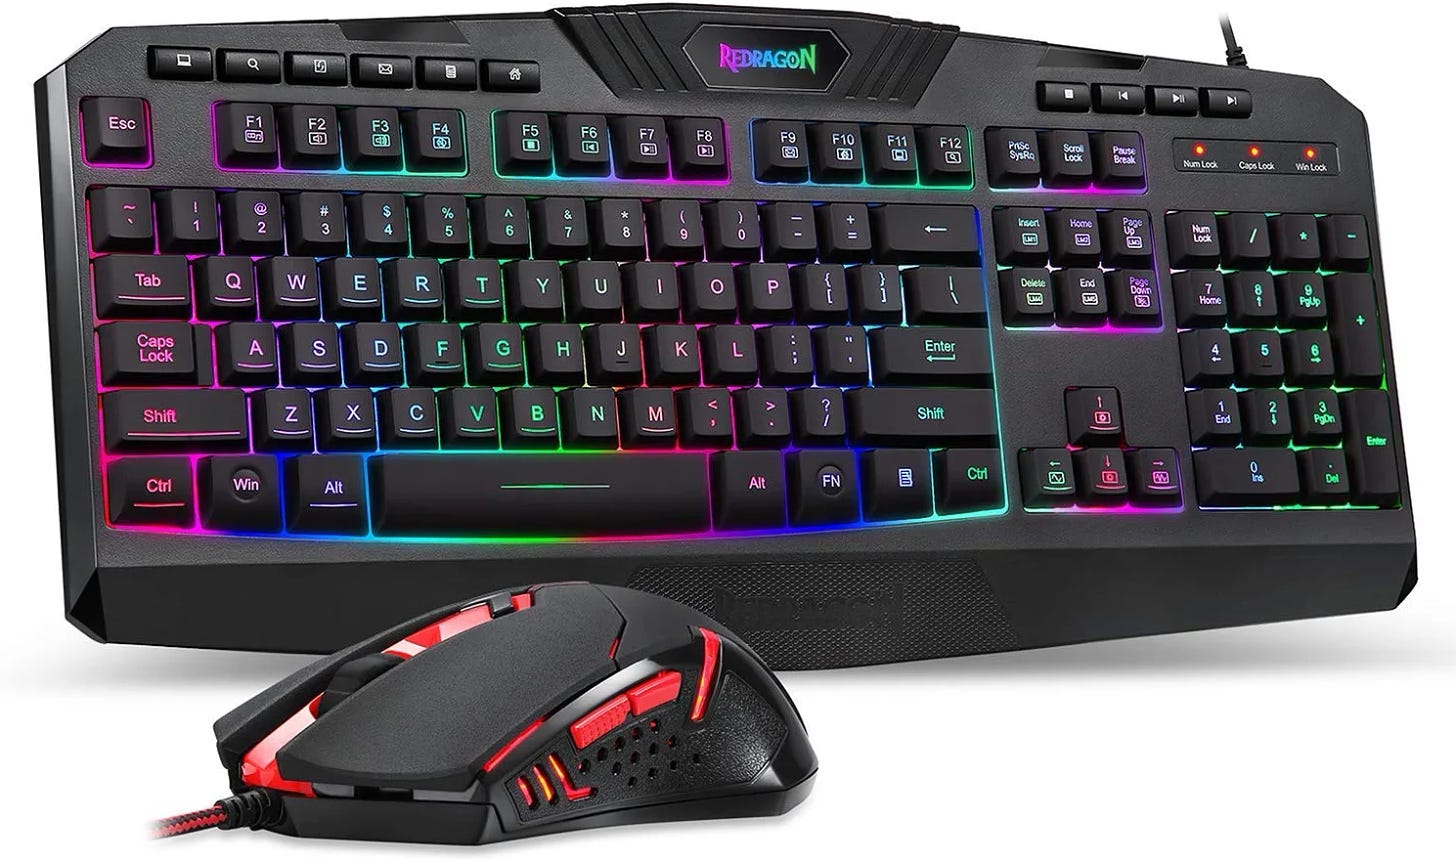 The Redragon S101 Wired Gaming Keyboard